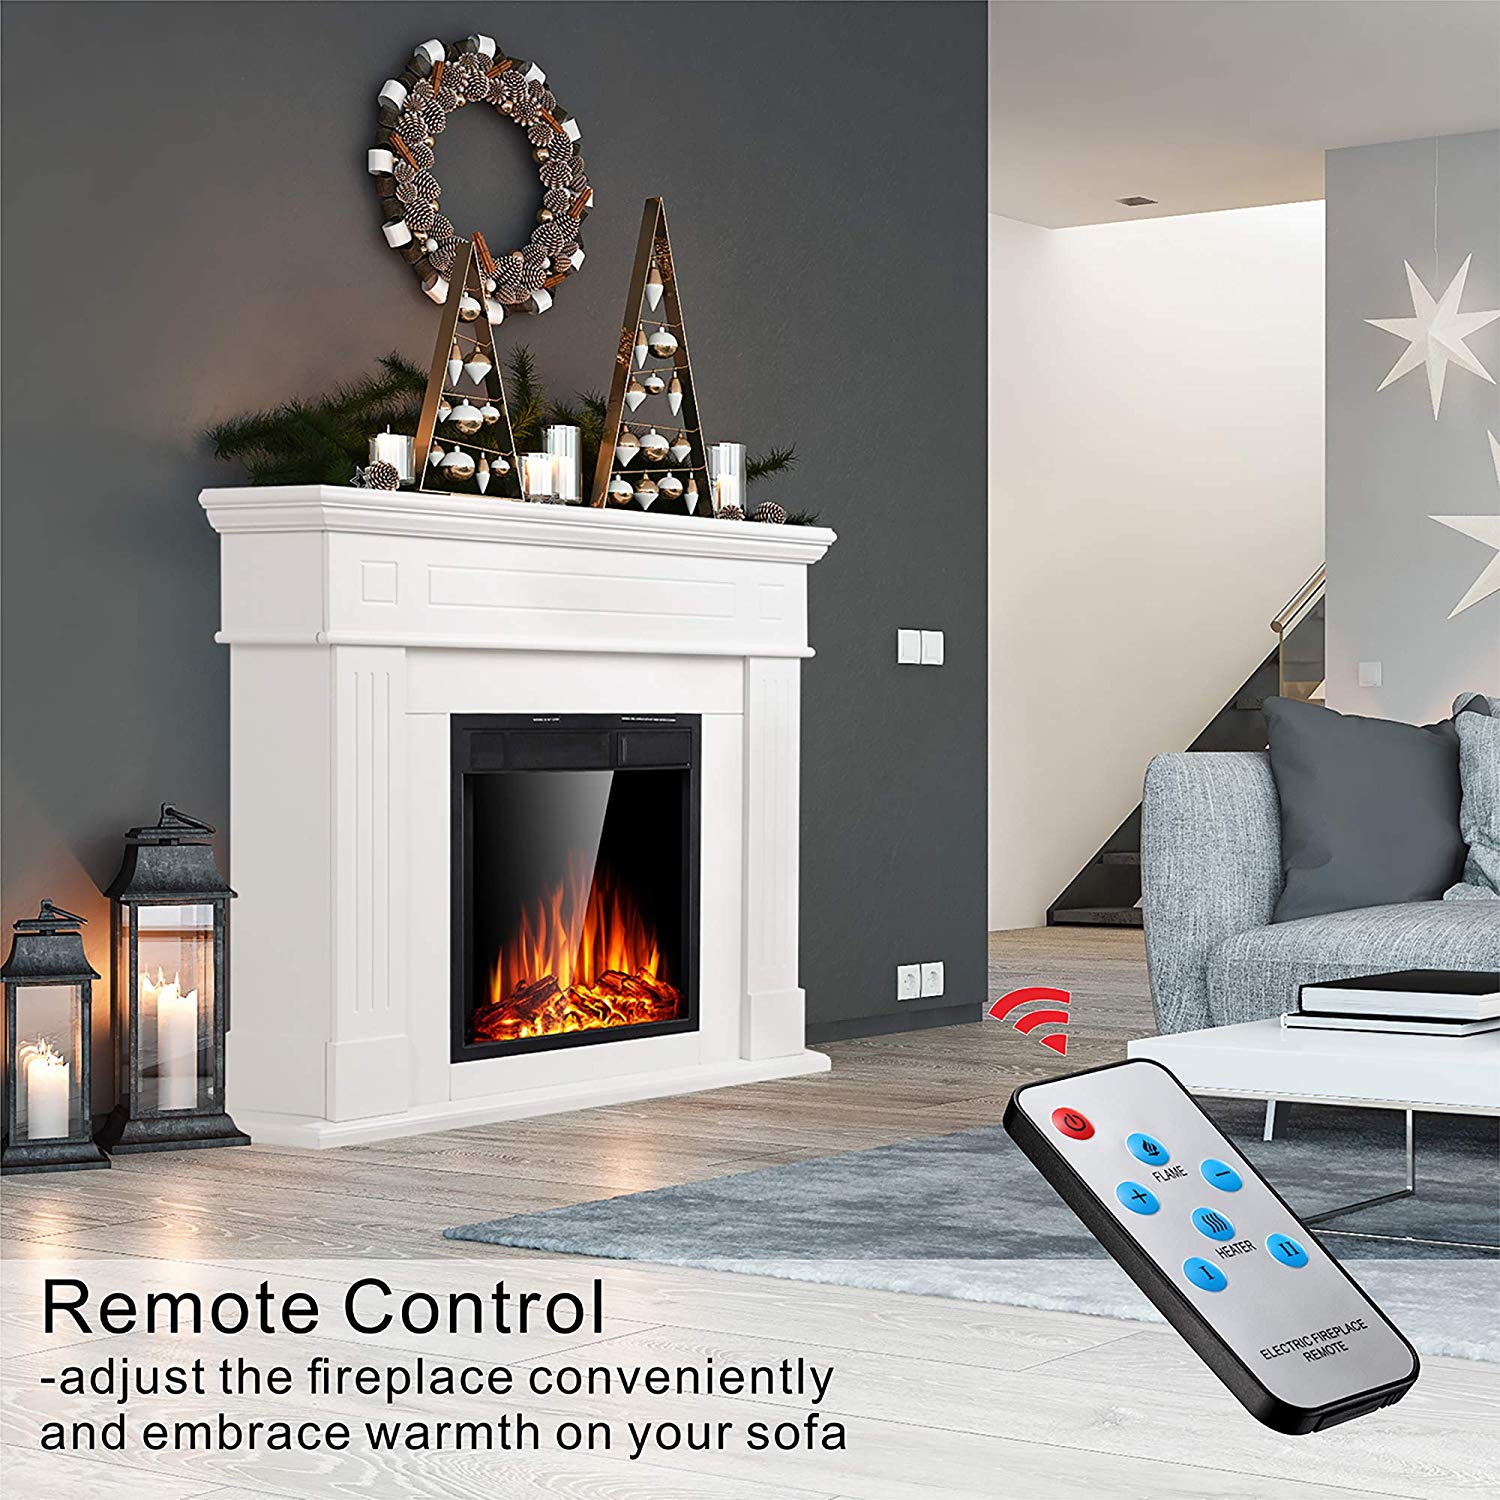 Rooms to Go Electric Fireplace New Jamfly Mantel Electric Fireplace Wood Surround Firebox Freestanding Electric Fireplace Heater Tv Stand Adjustable Led Flame with Remote Control